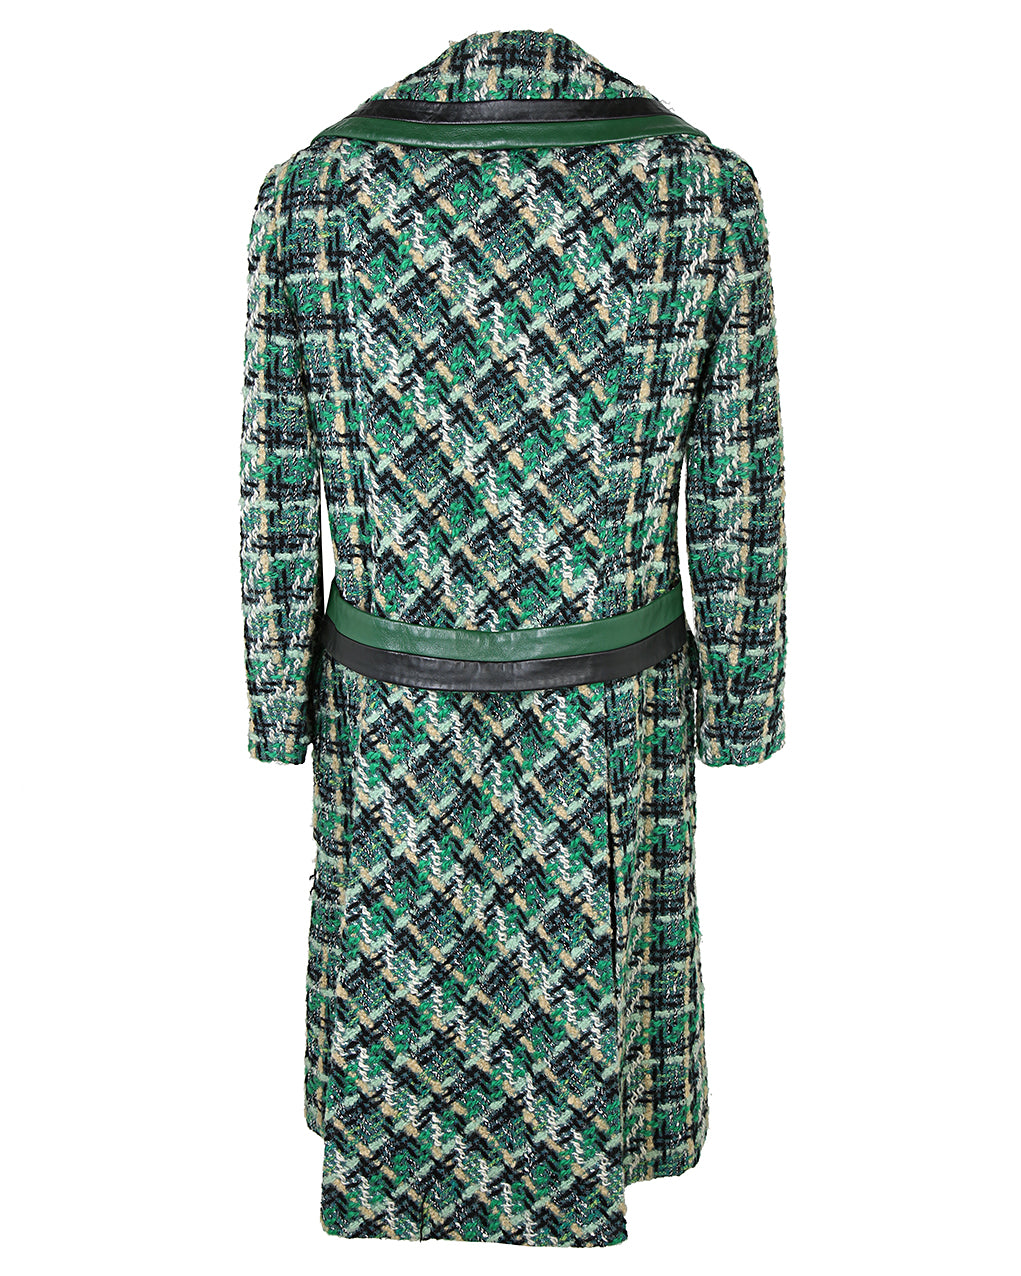 Late 1960s Jean Patou of Paris Green Checked Leather Trimmed Coat - M